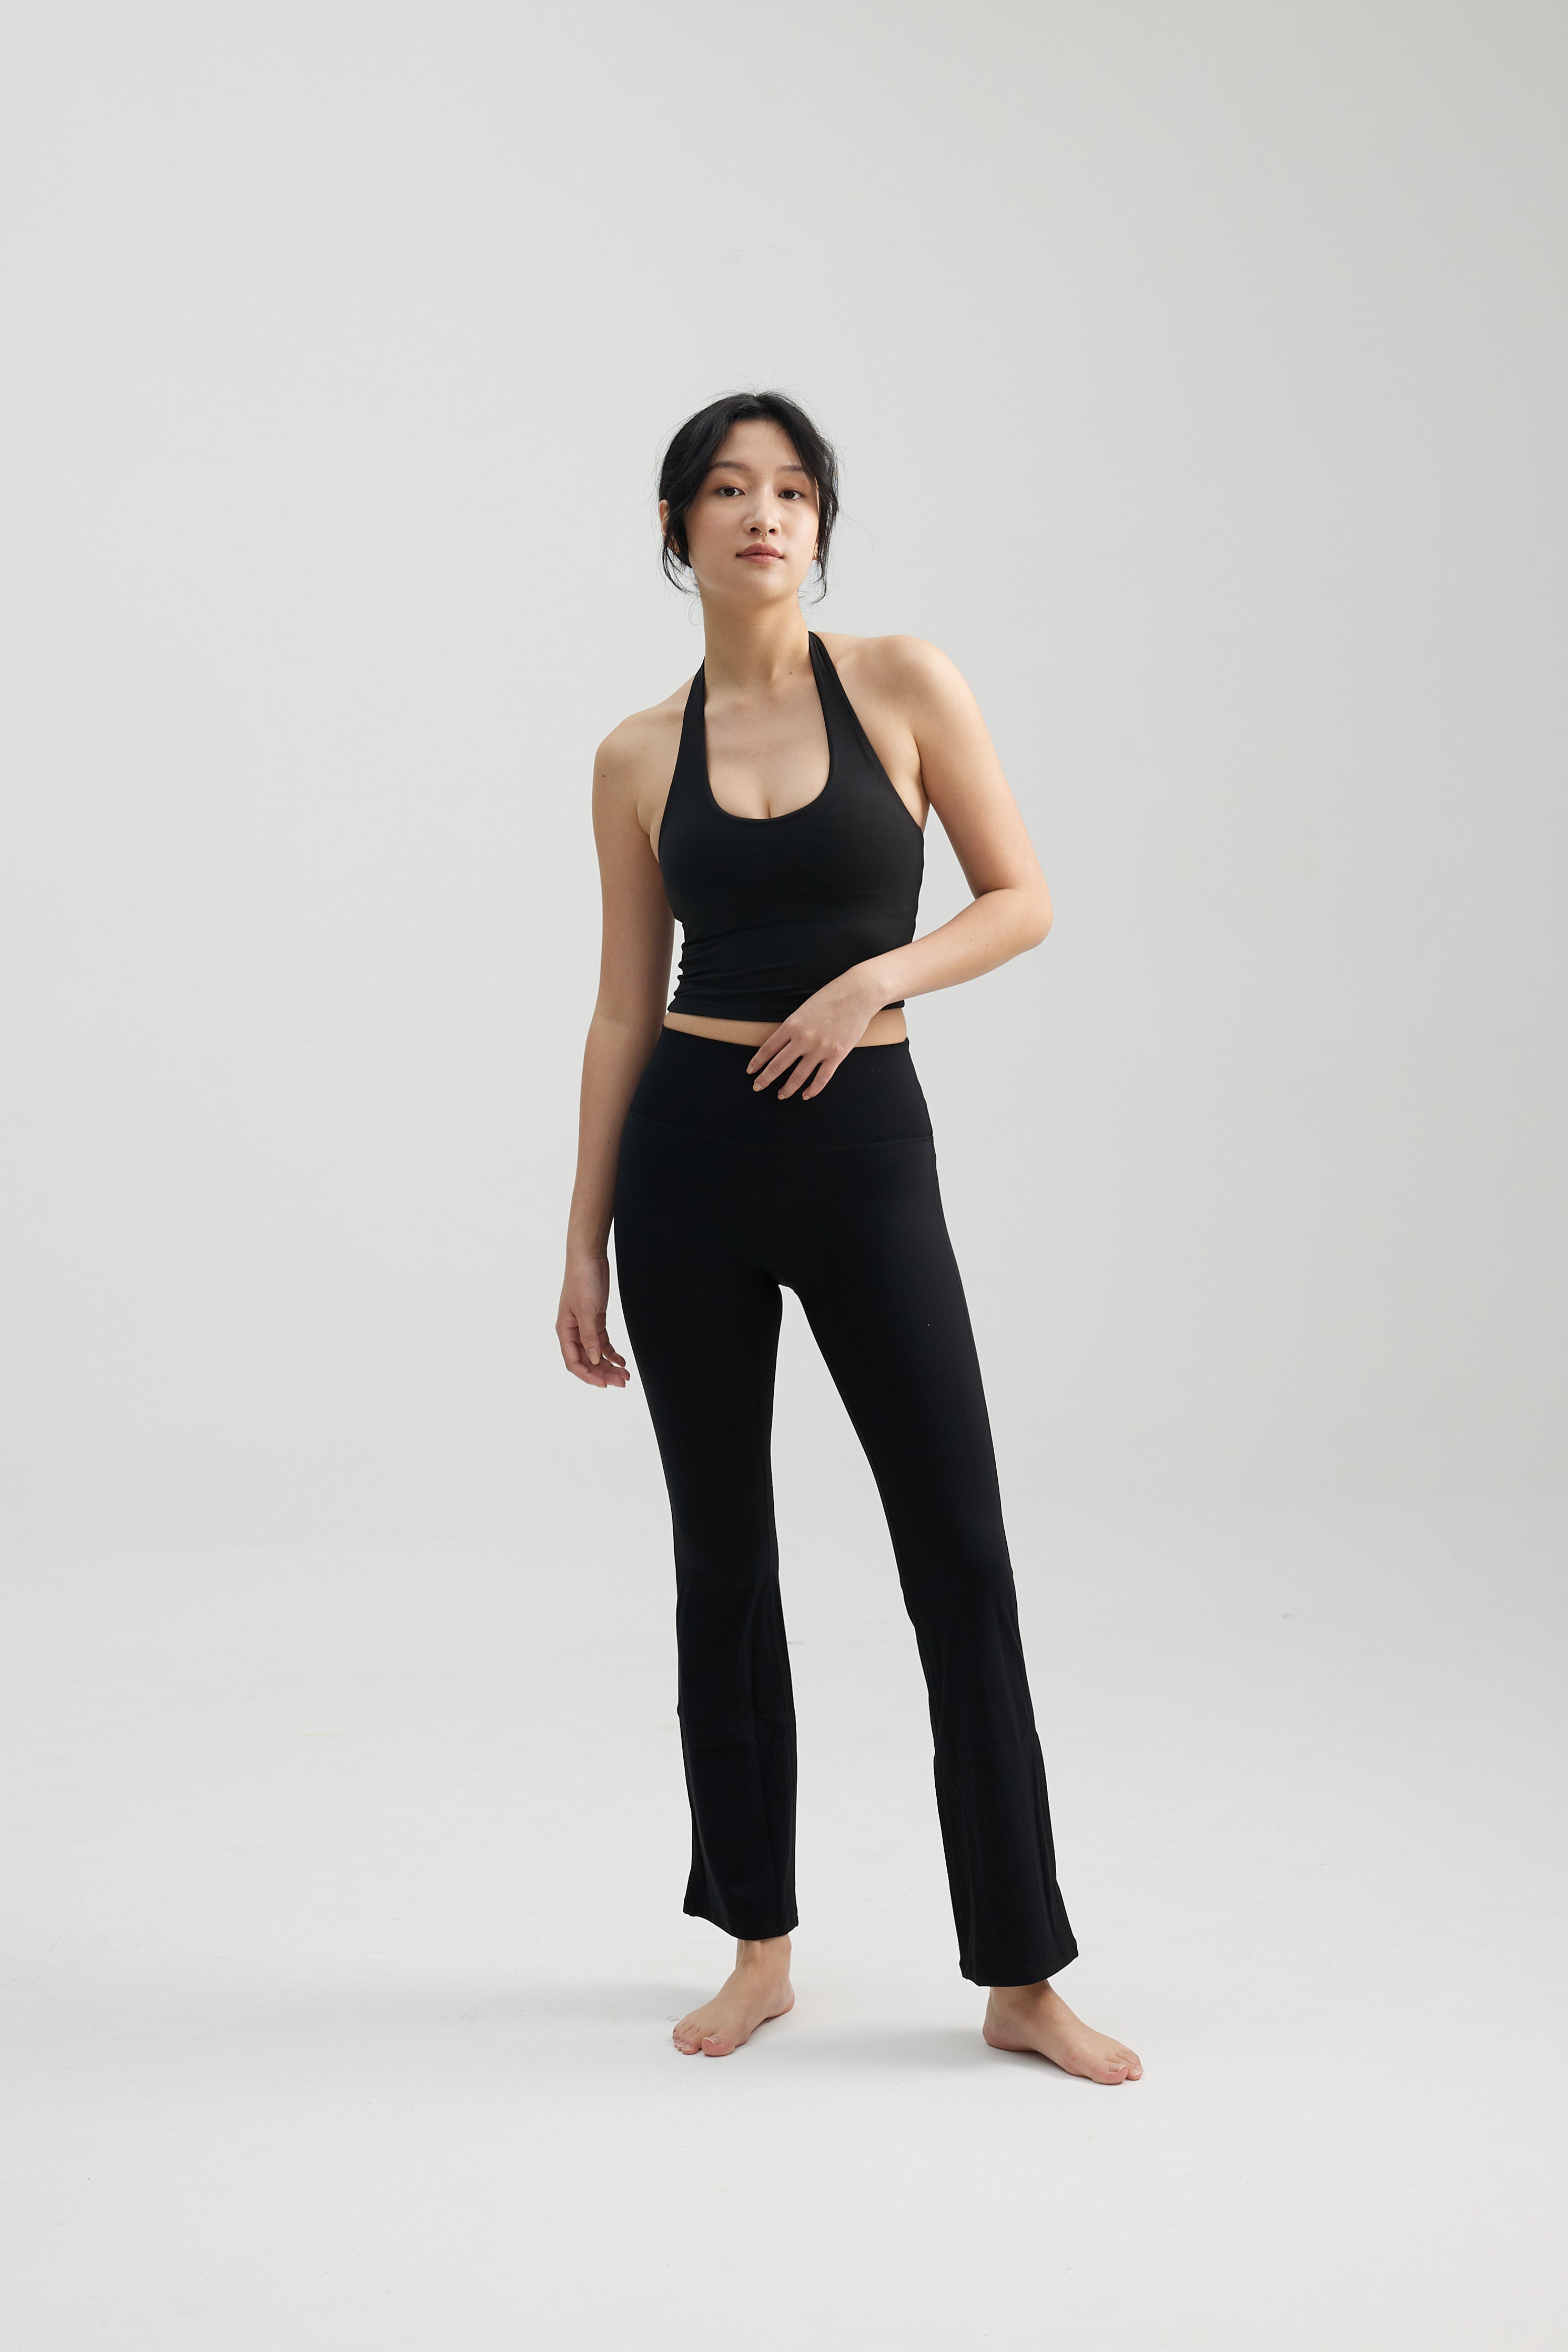 Yoga Wear Clothes & Attire Online in Singapore